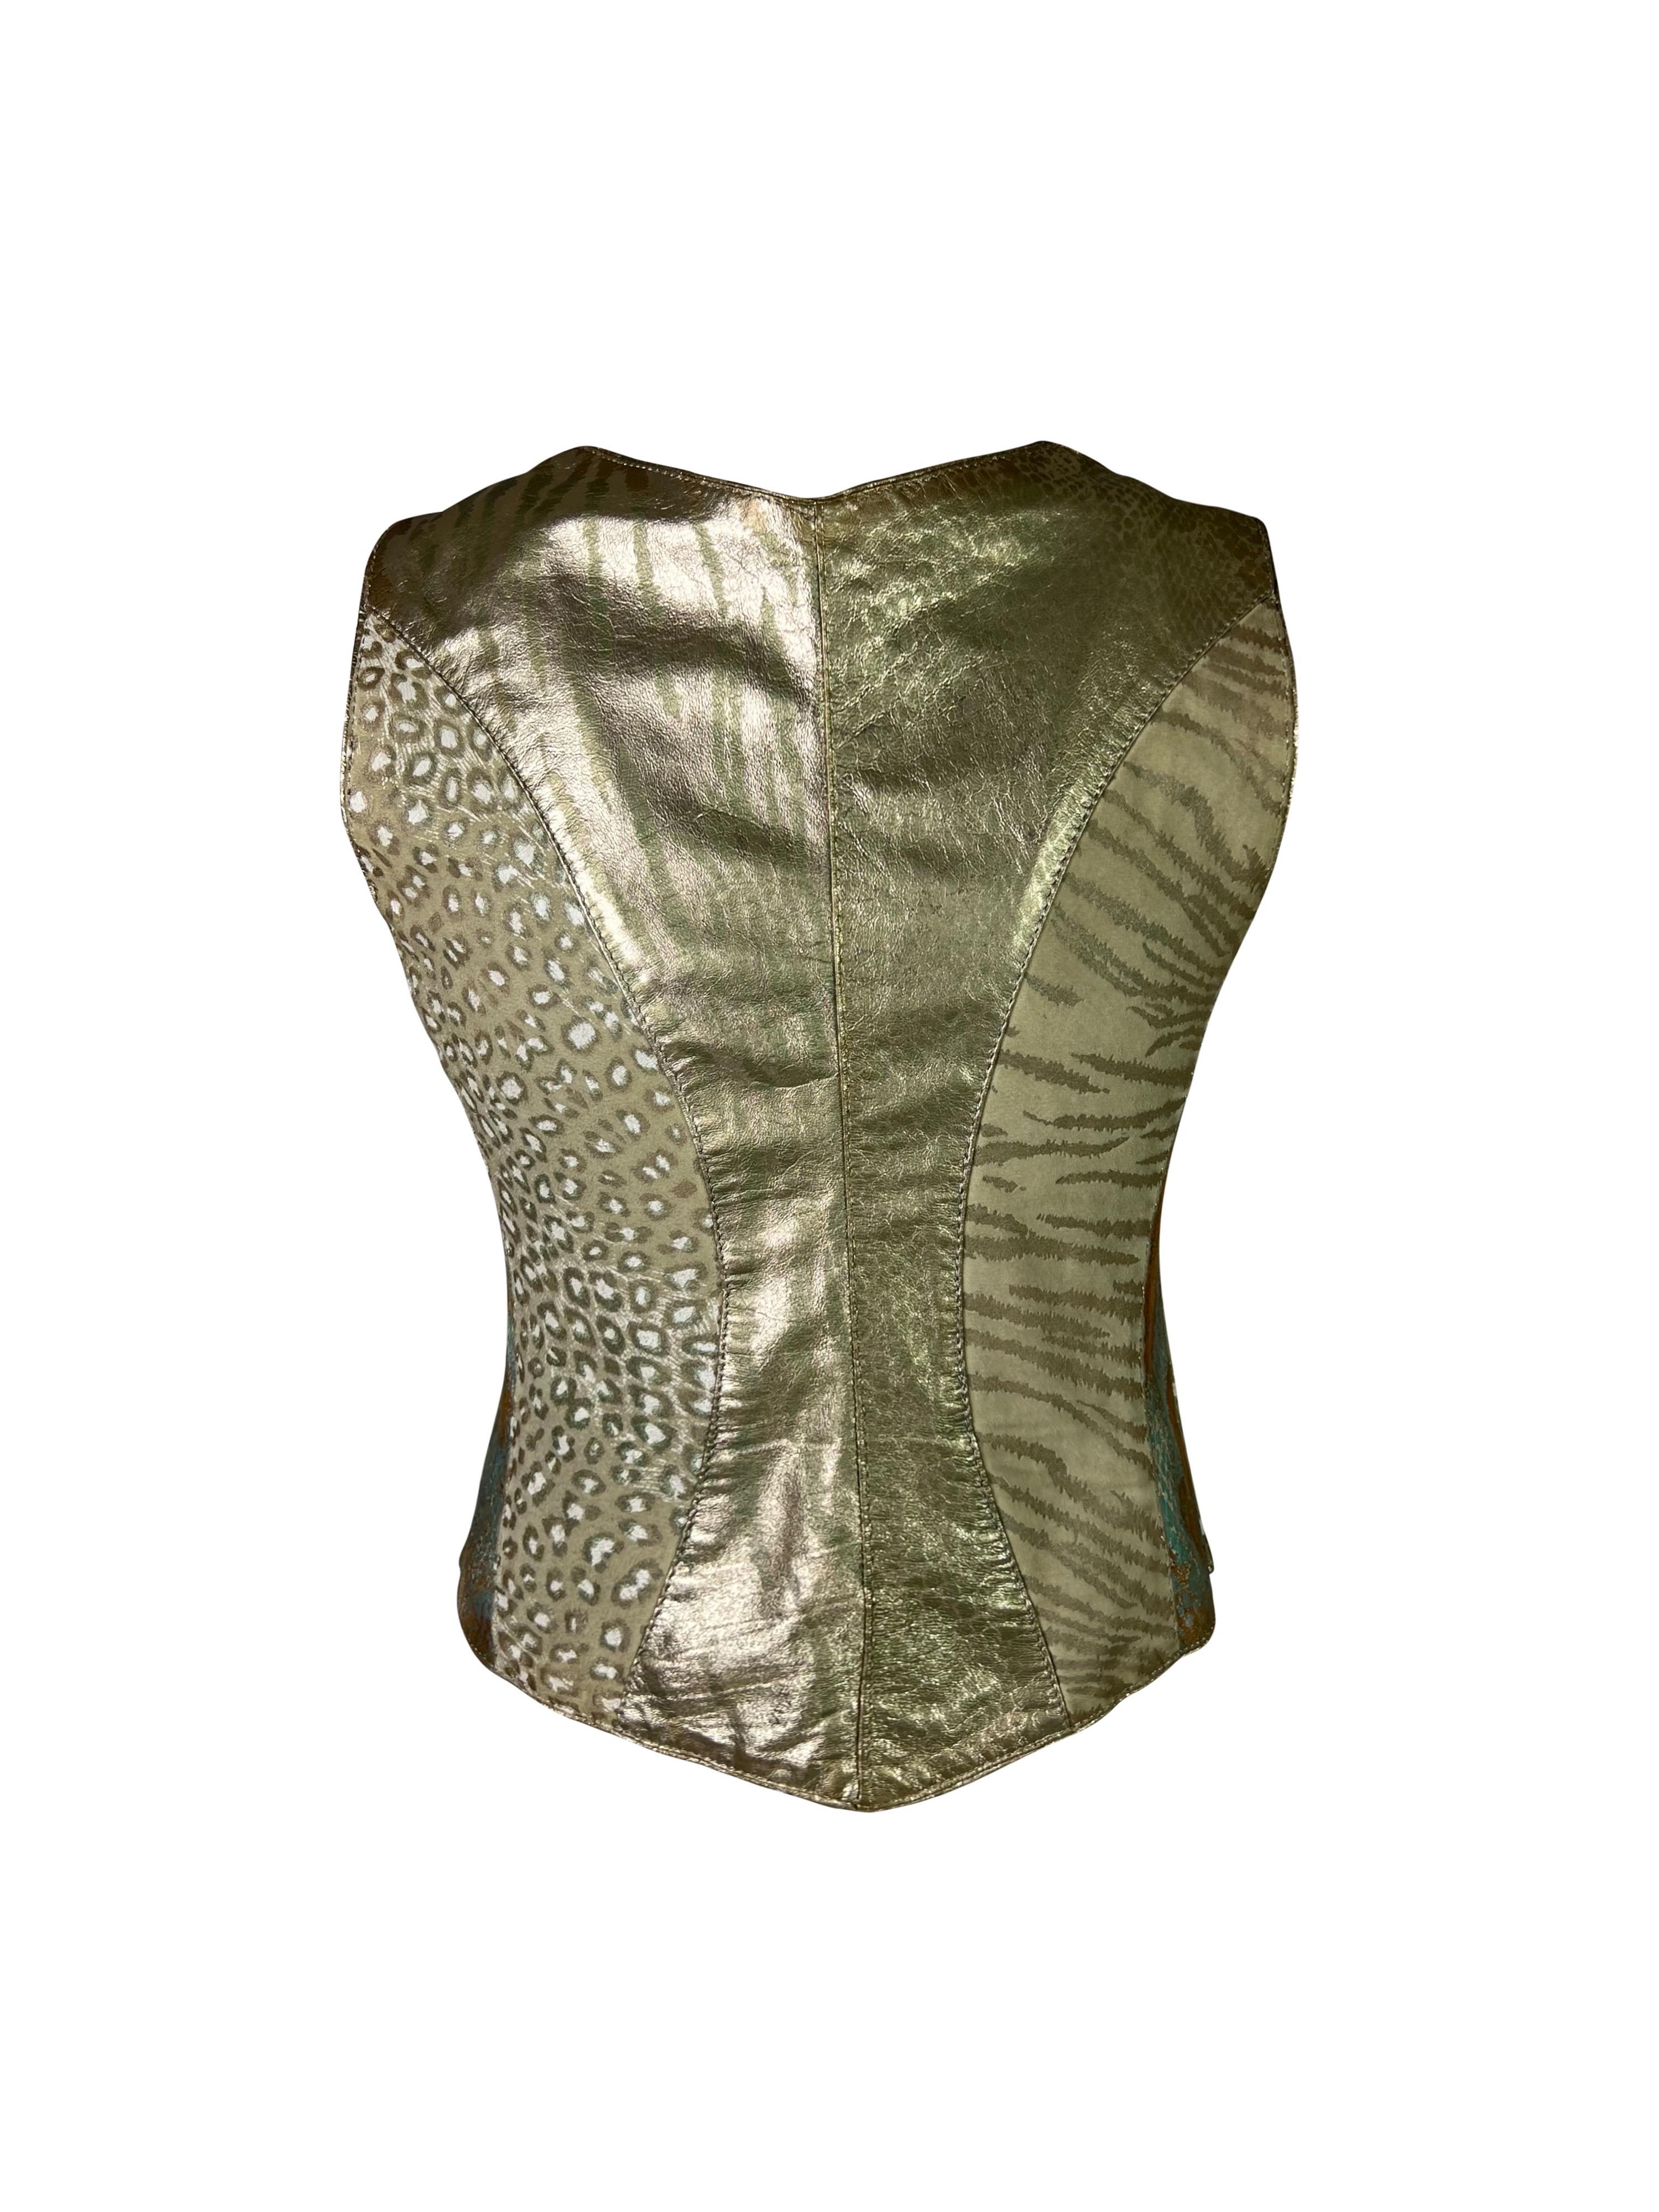 FW 1994 Roberto Cavalli Leather Patchwork Top In Excellent Condition For Sale In Prague, CZ